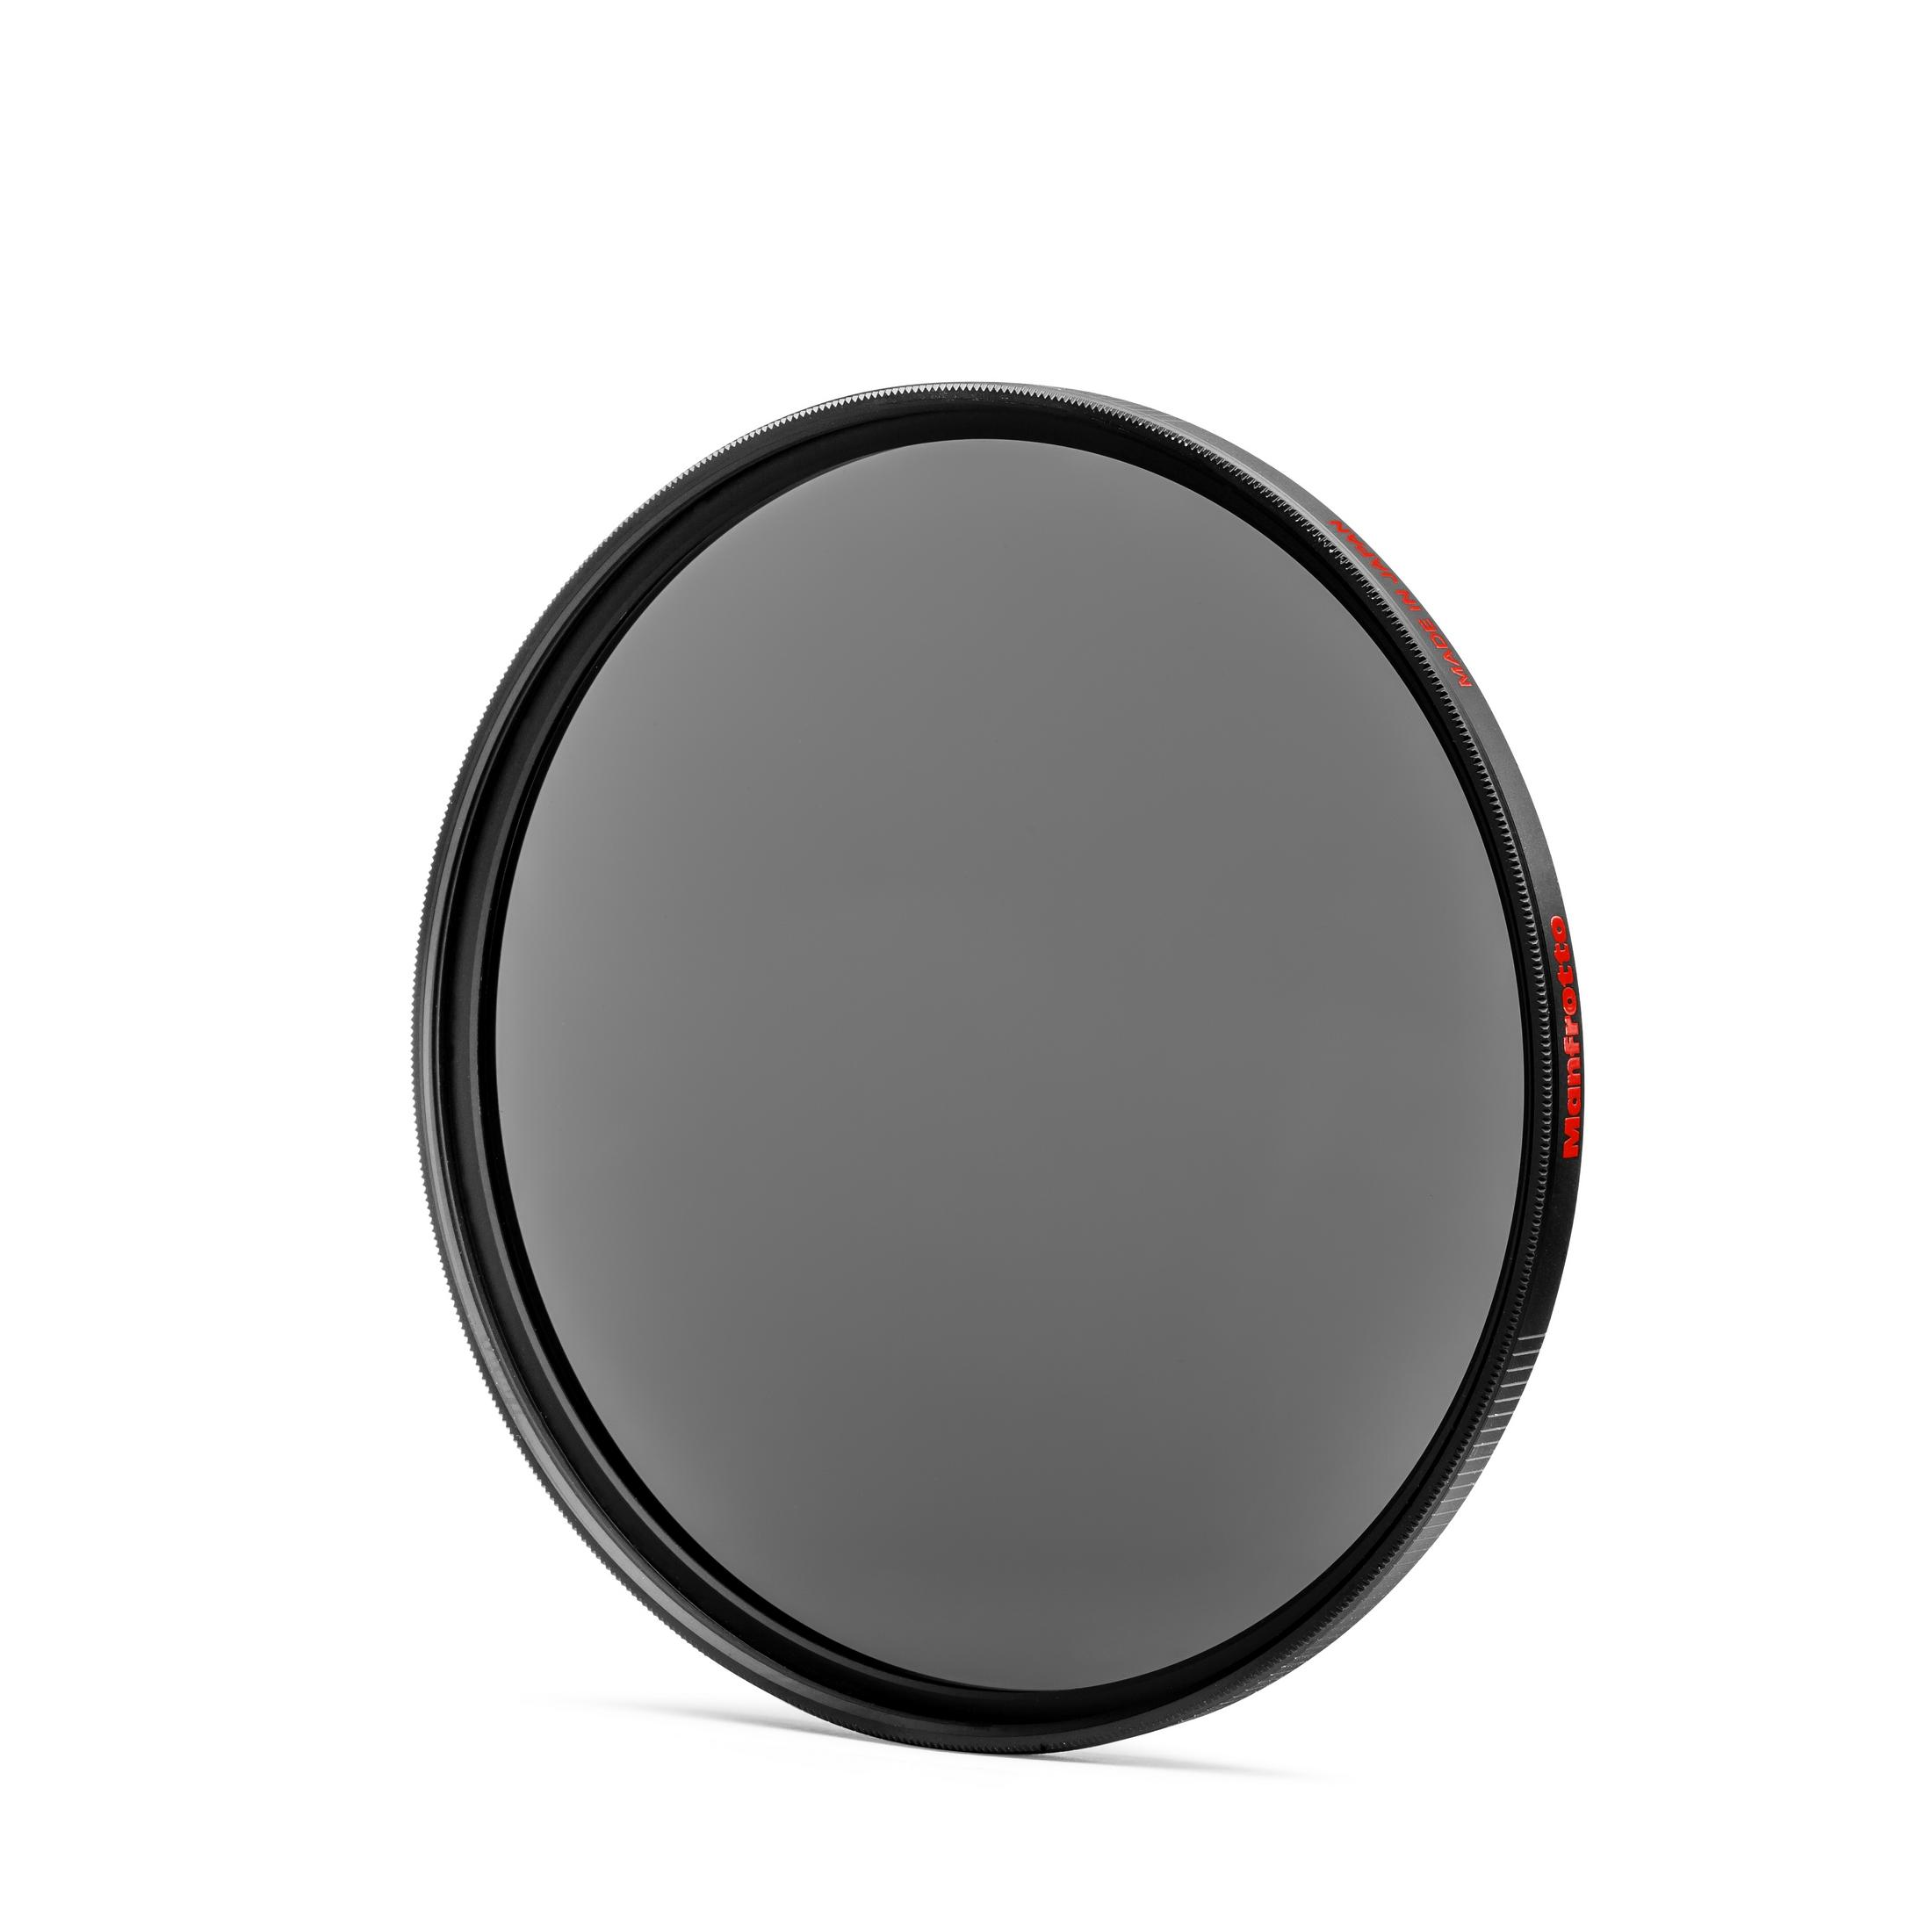 MANFROTTO MFND8-55 RUNDFILTER 55MM mm 55 Pol-Filter